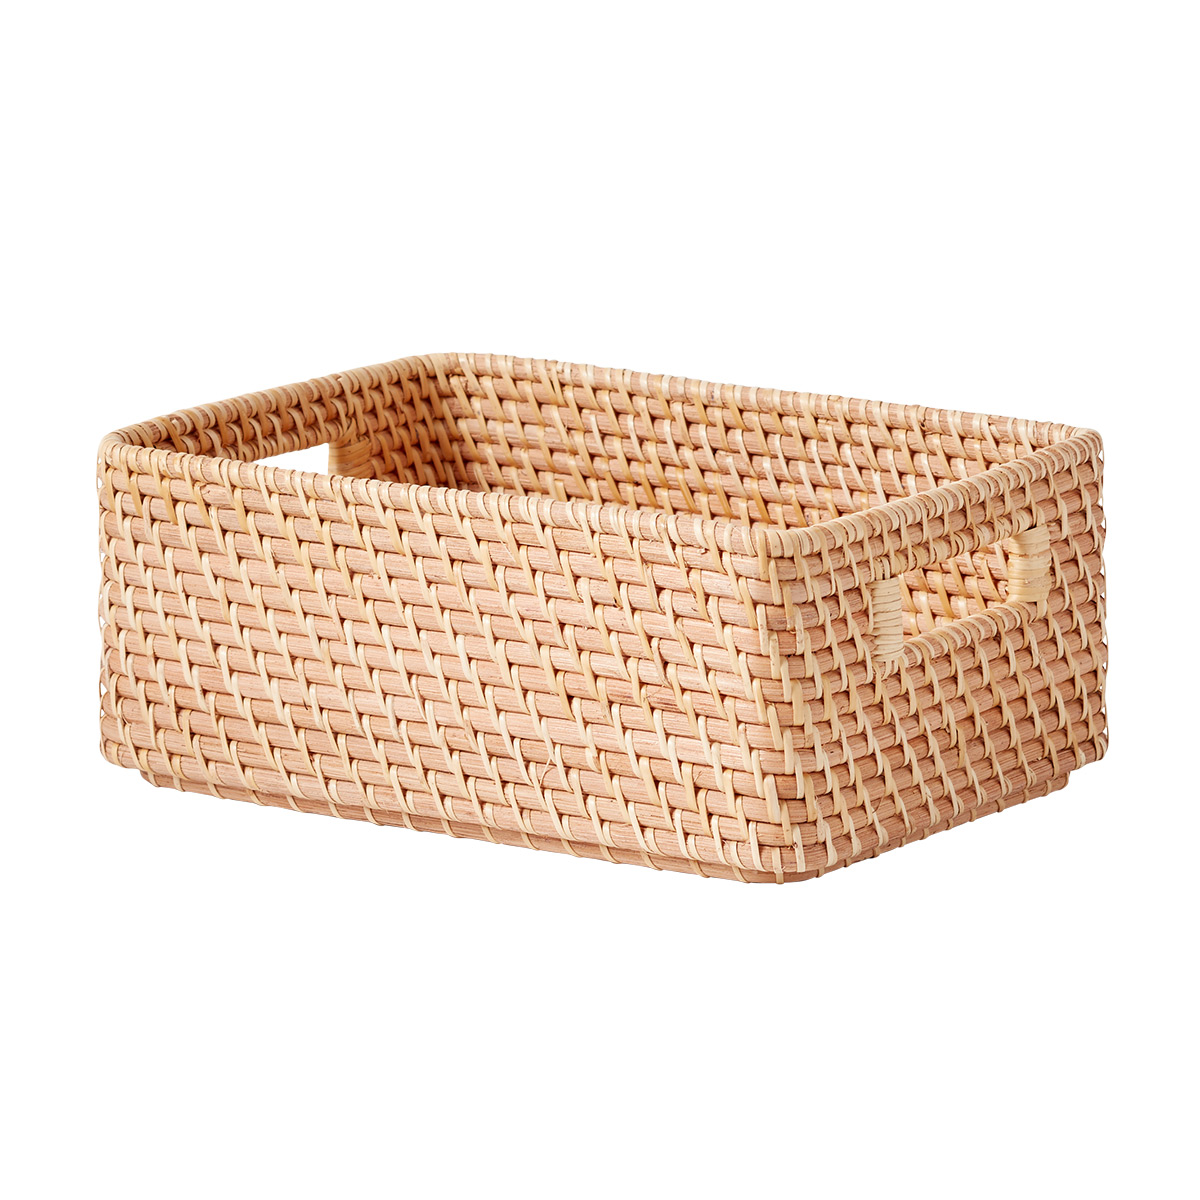 Studio McGee + Threshold Decorative Cube Basket with Leather Pull, Natural,  13″ x 14″ x 11″ – Find Organizers That Fit